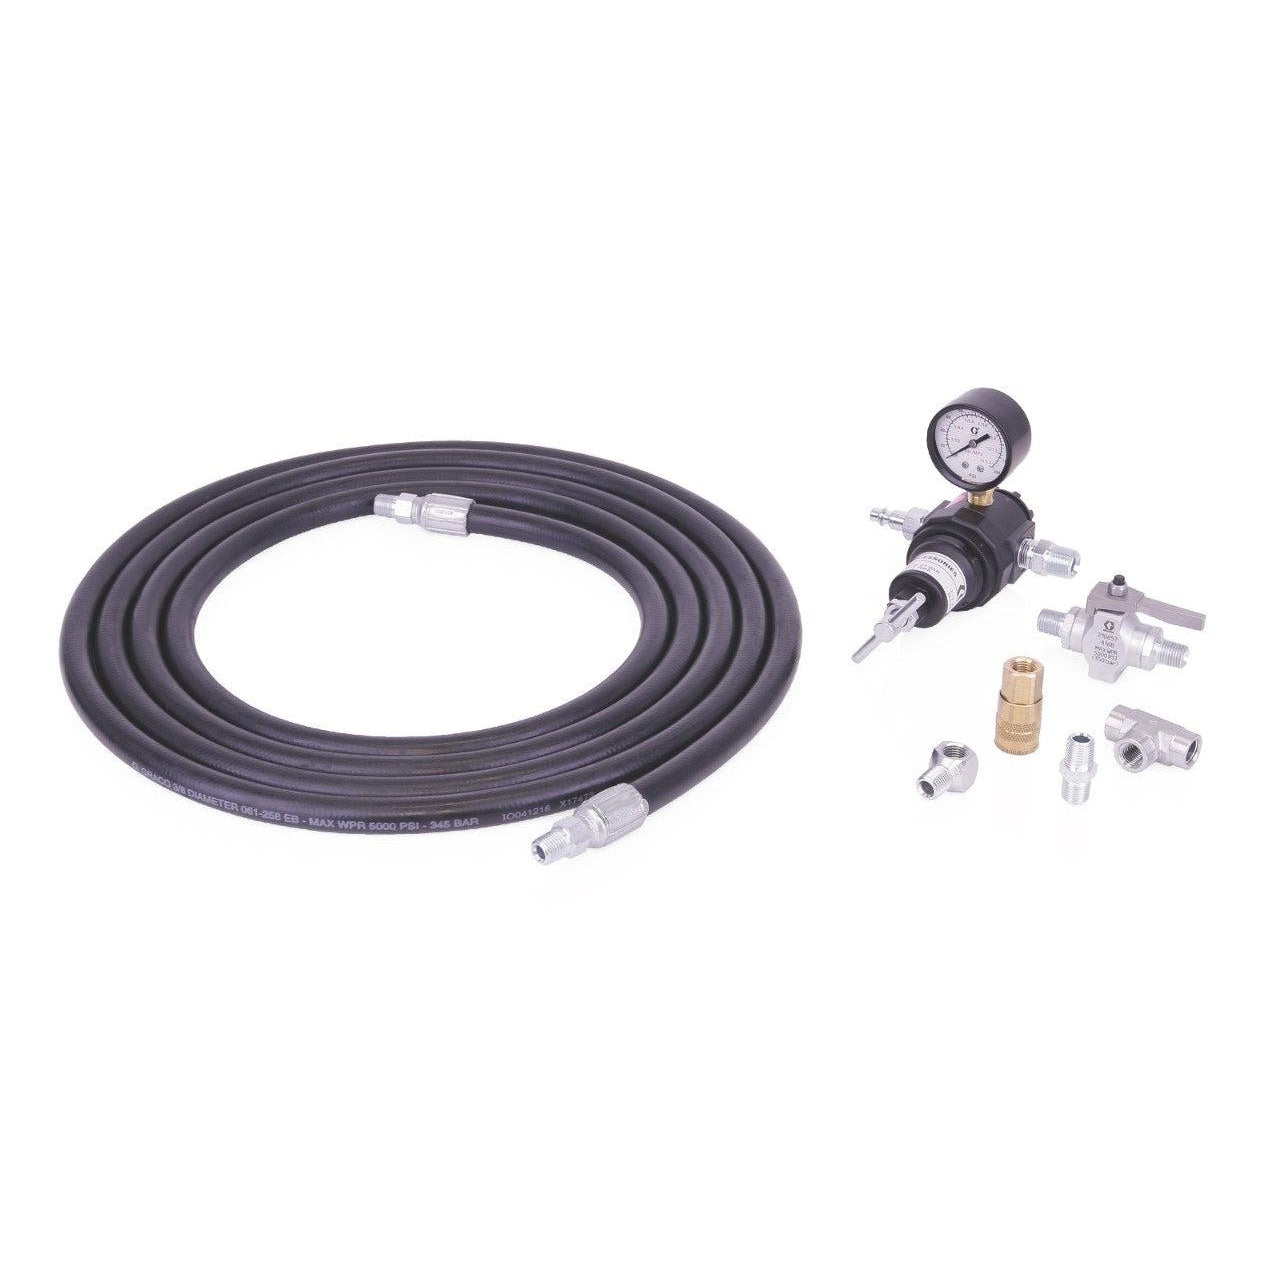 Dispense Kit for Undercoating and Rustproofing Pump Packages - 15 ft (4.6 m) Hose